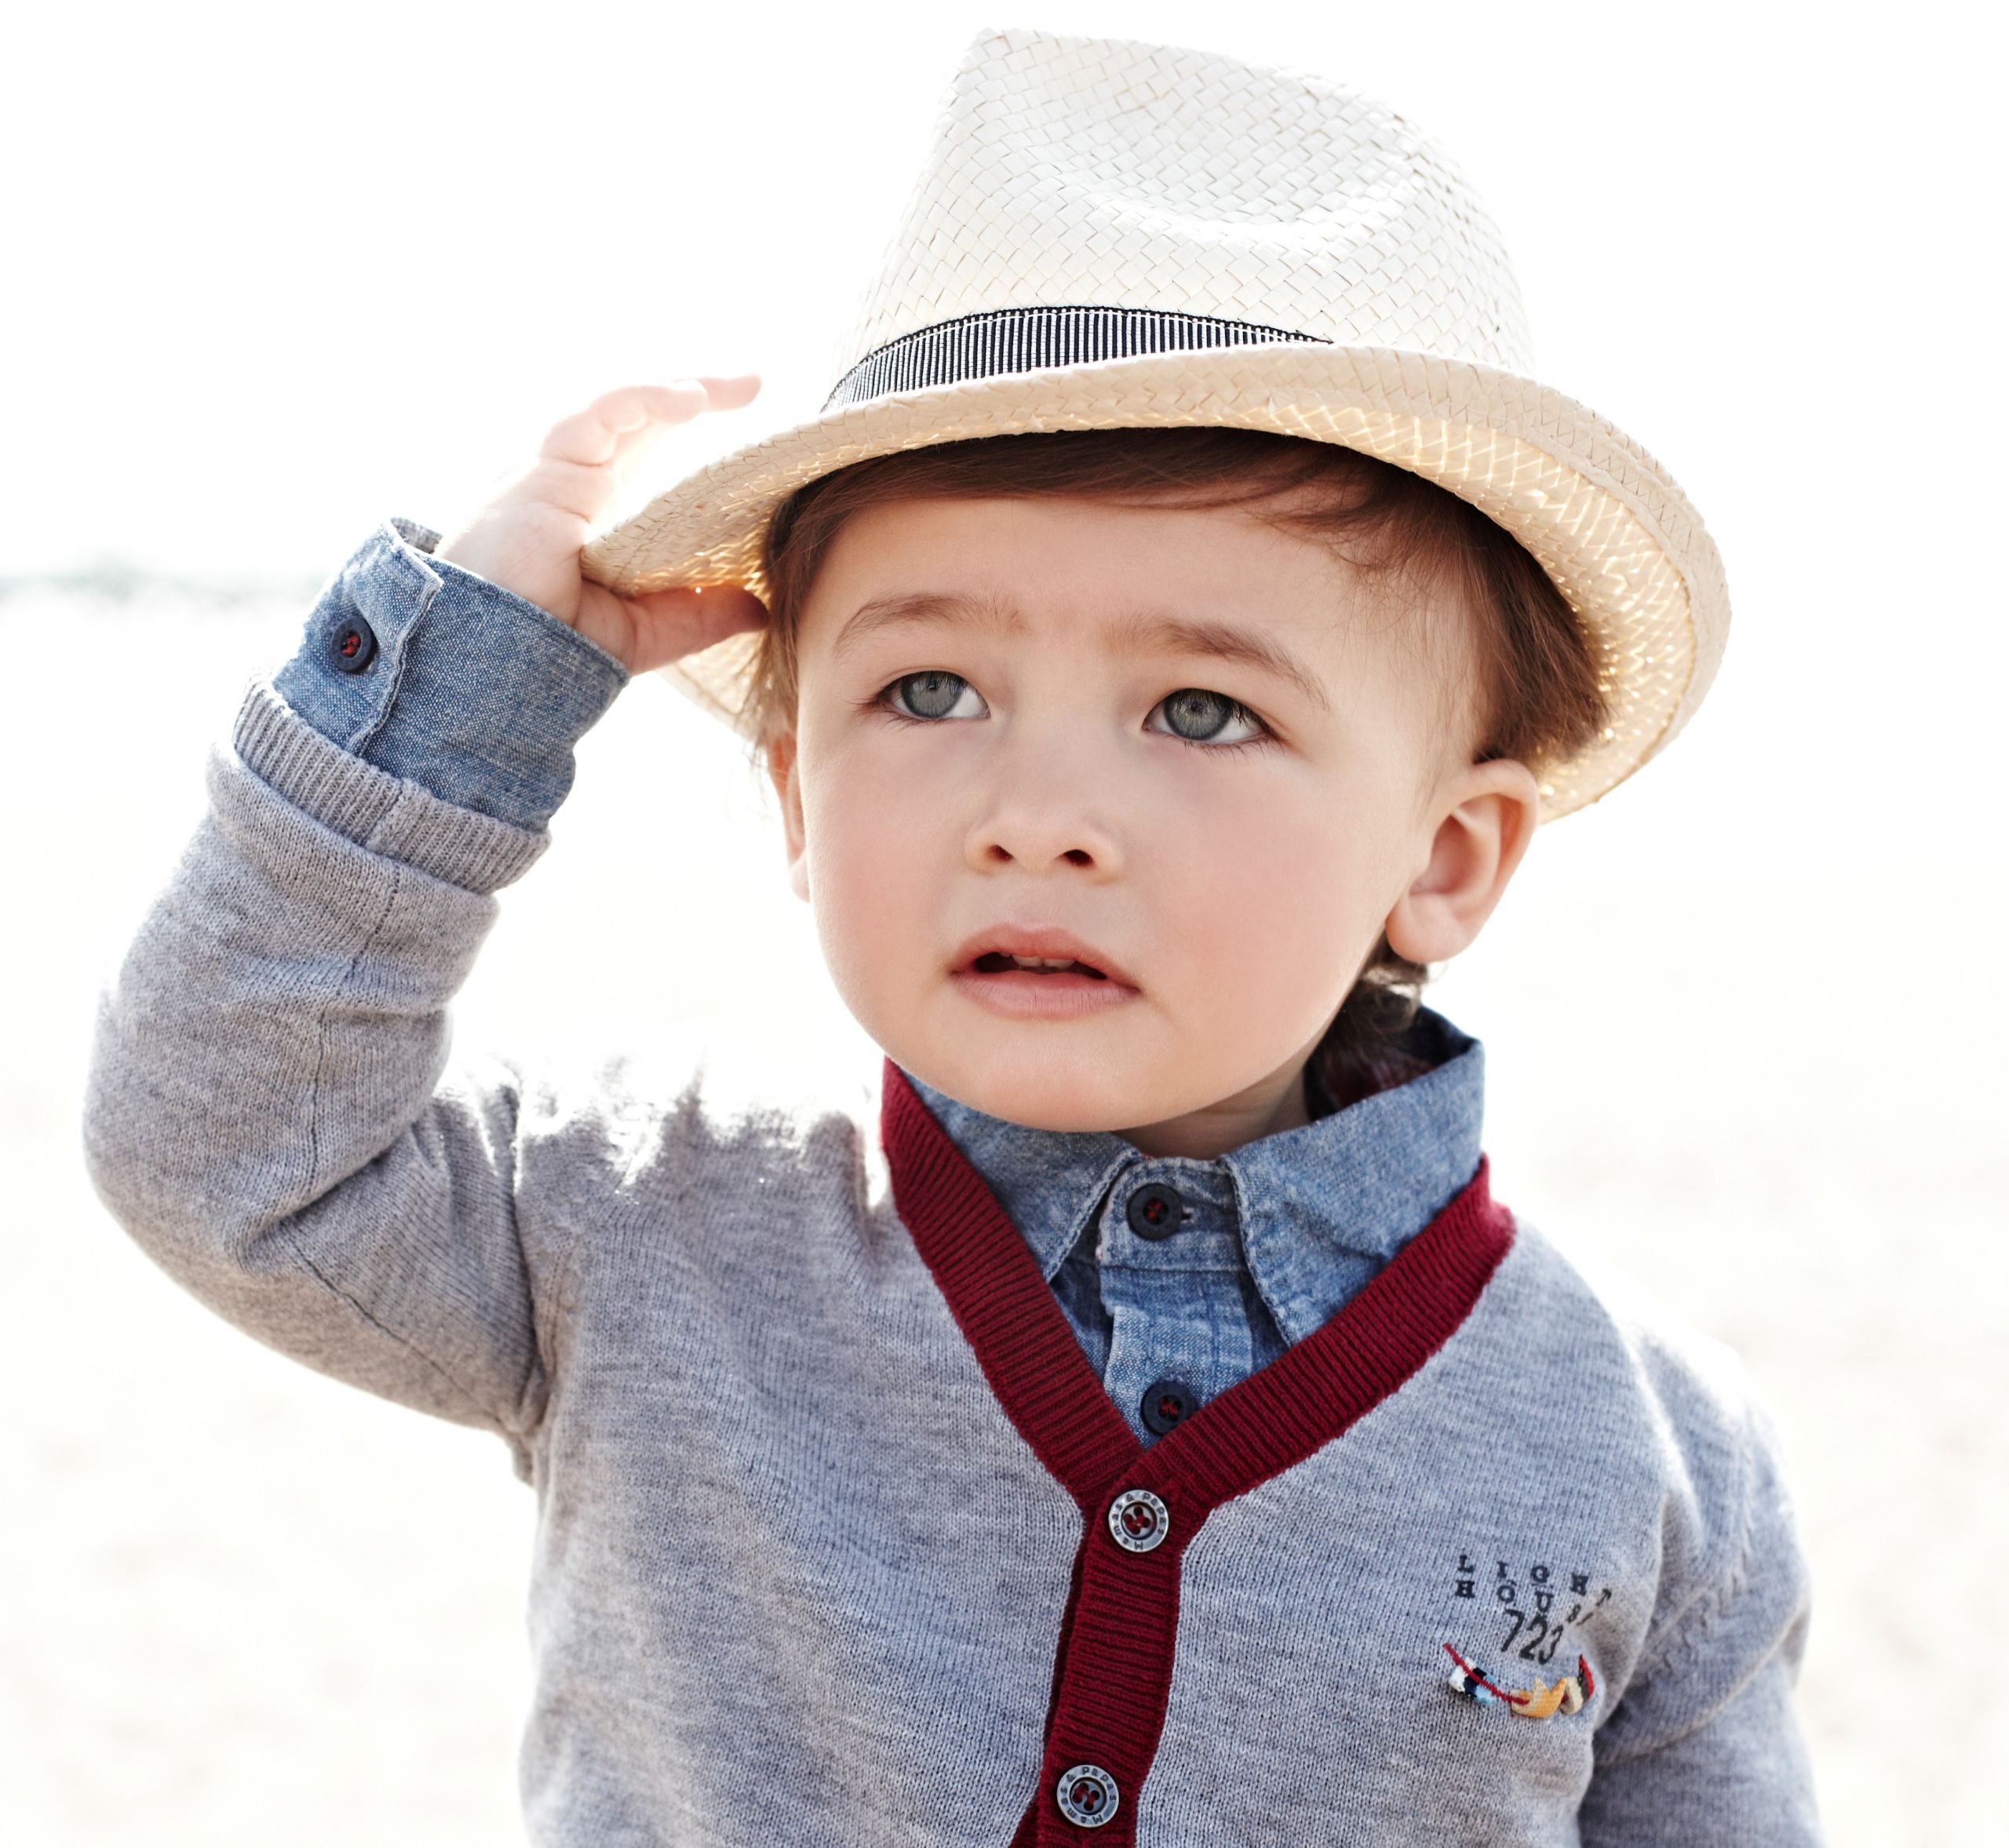 Fashion Baby Clothes
 Importance of Baby Clothing for their Beauty and Care